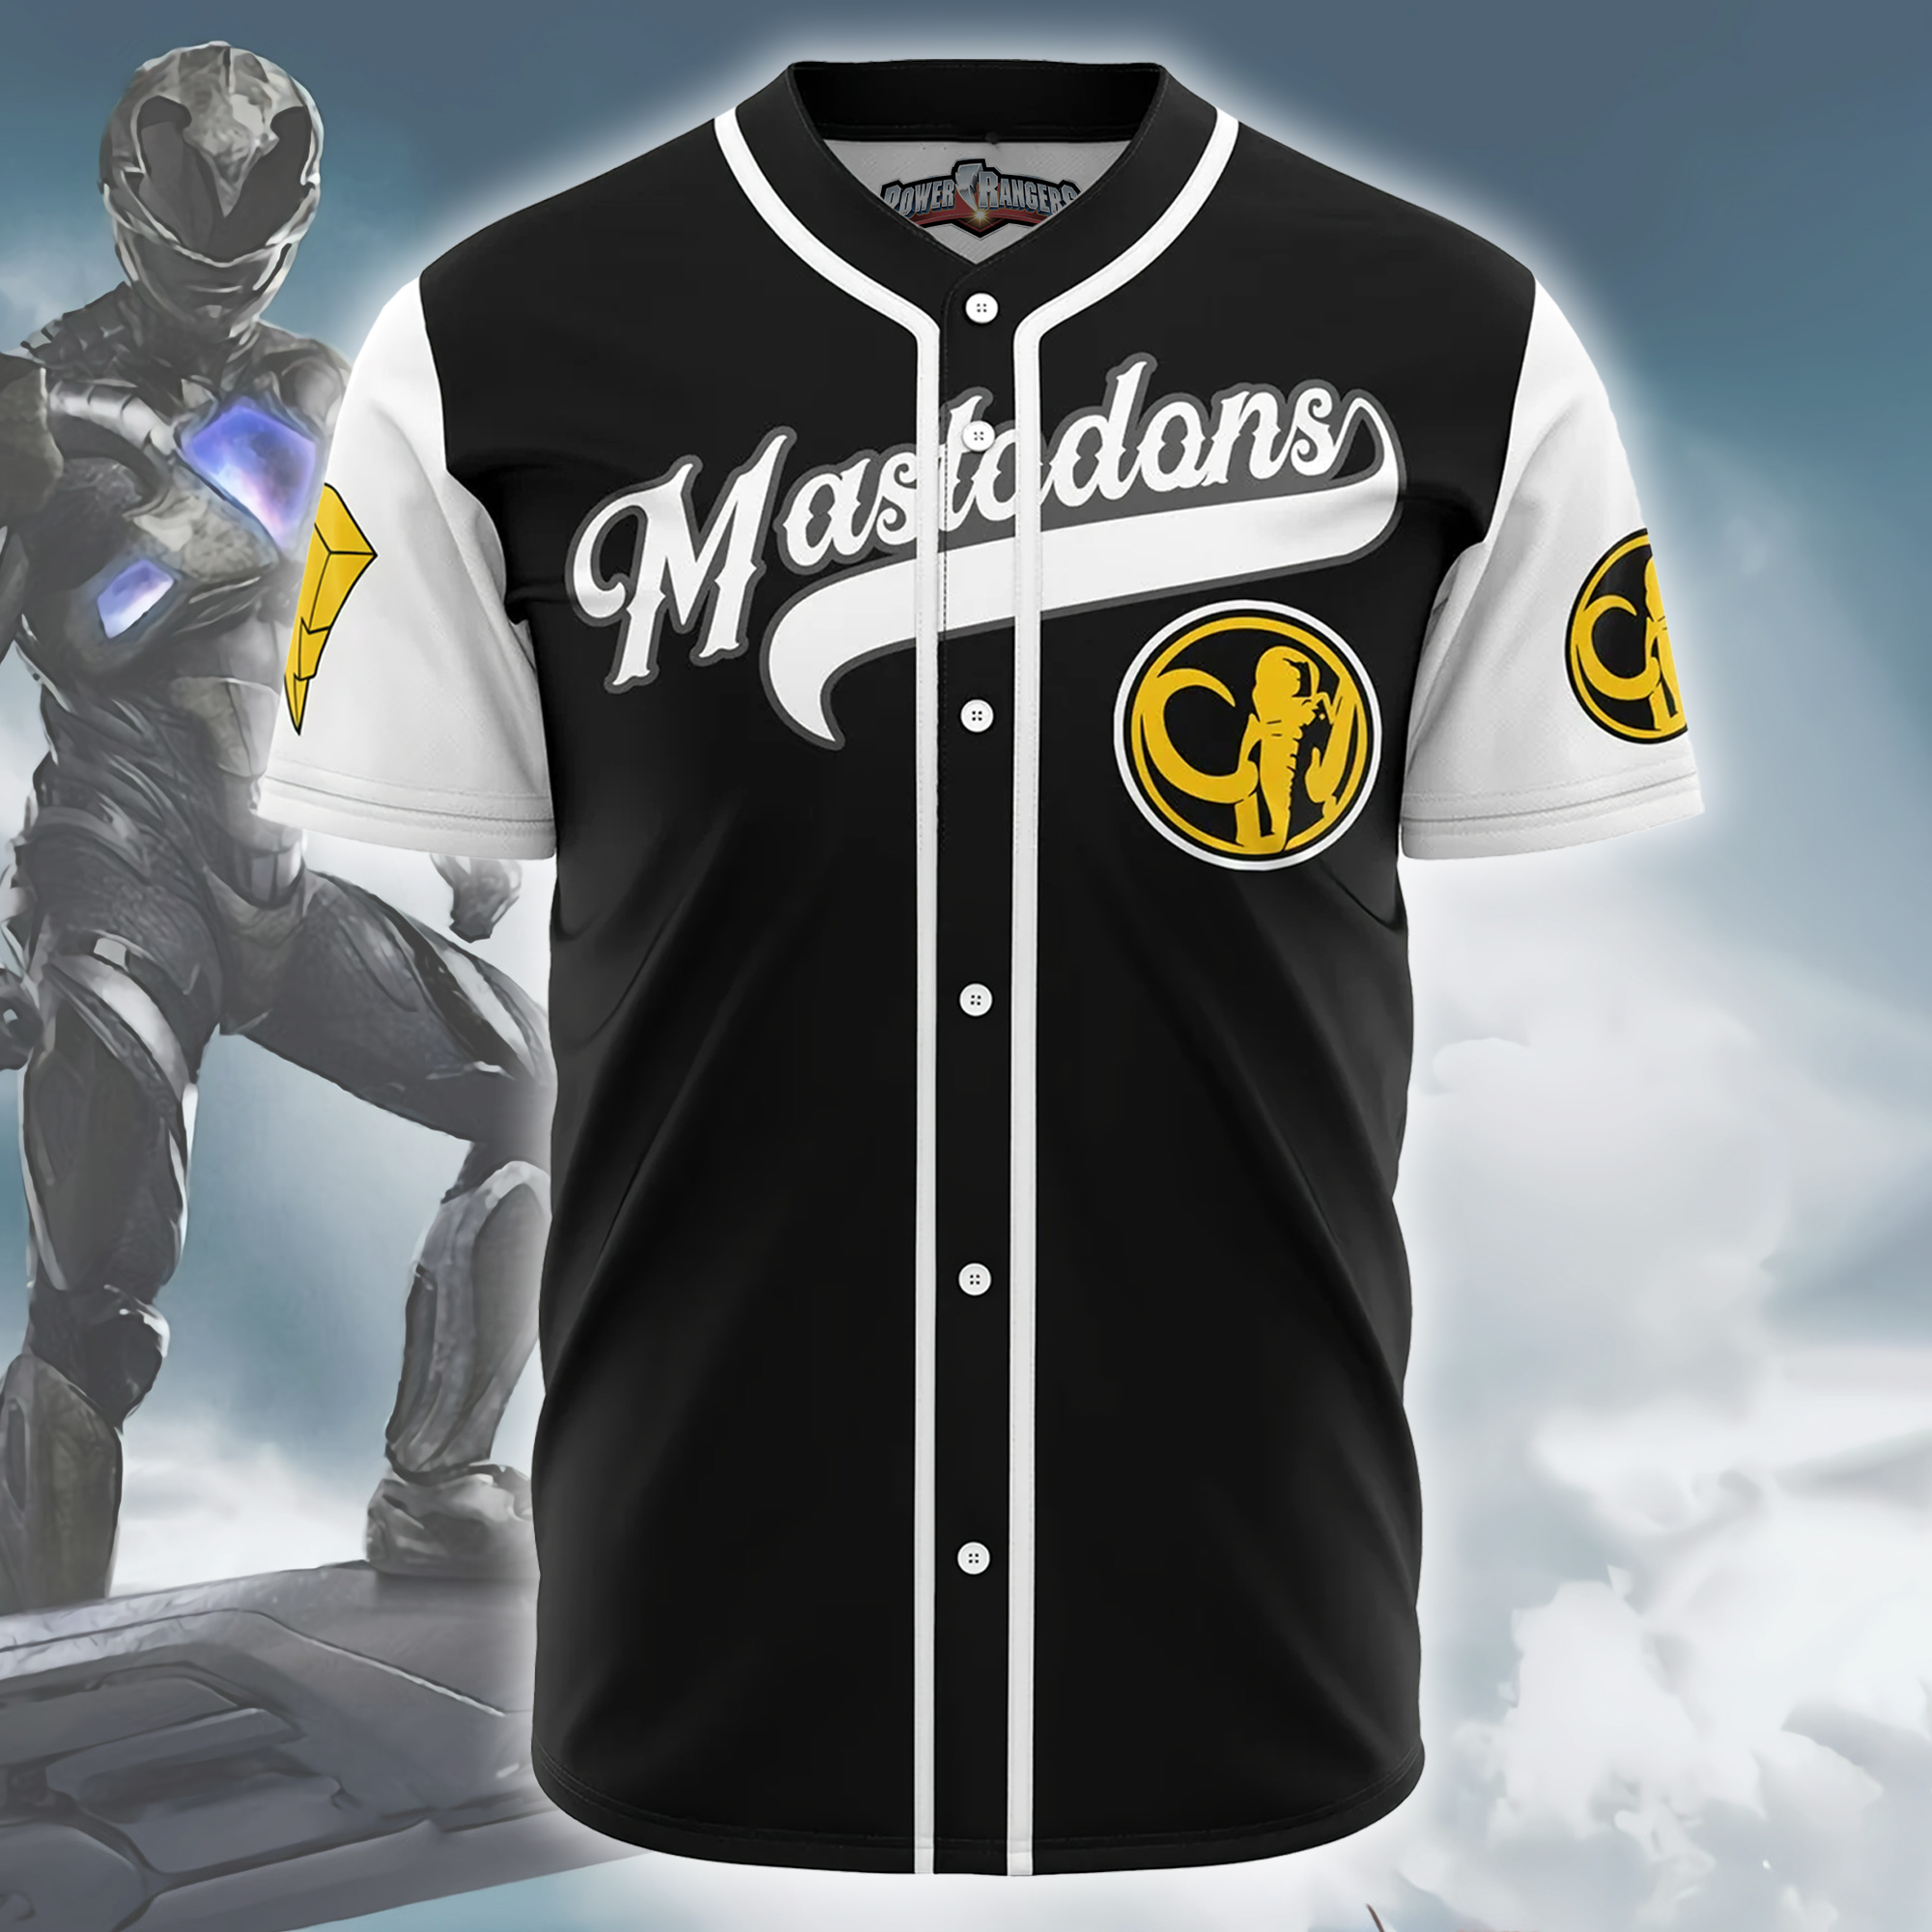 Personalized White Tigers Tommy Oliver Power Rangers Baseball Jersey